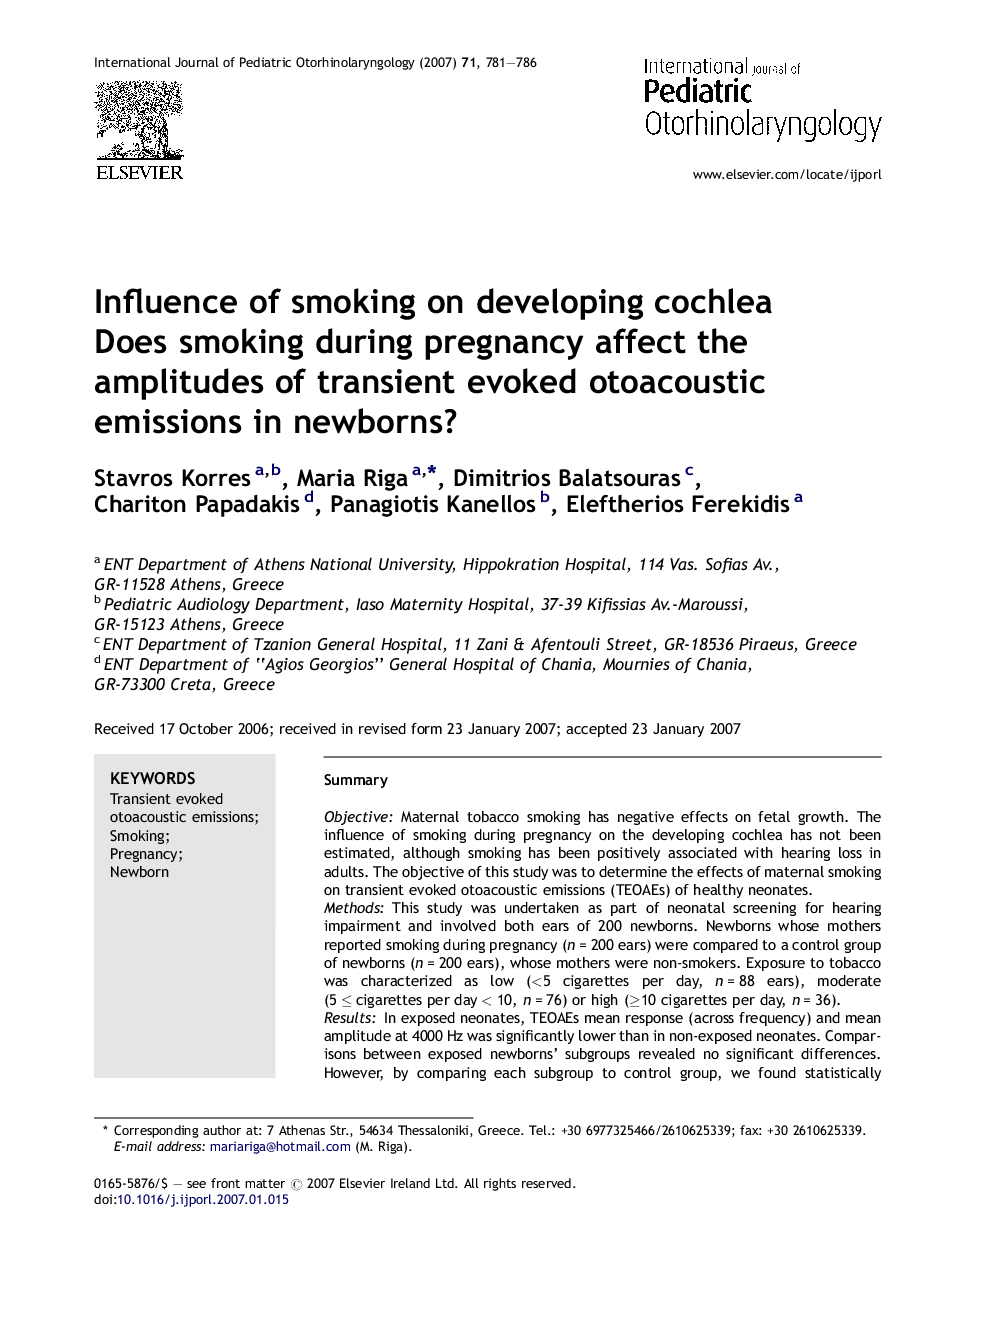 Influence of smoking on developing cochlea: Does smoking during pregnancy affect the amplitudes of transient evoked otoacoustic emissions in newborns?